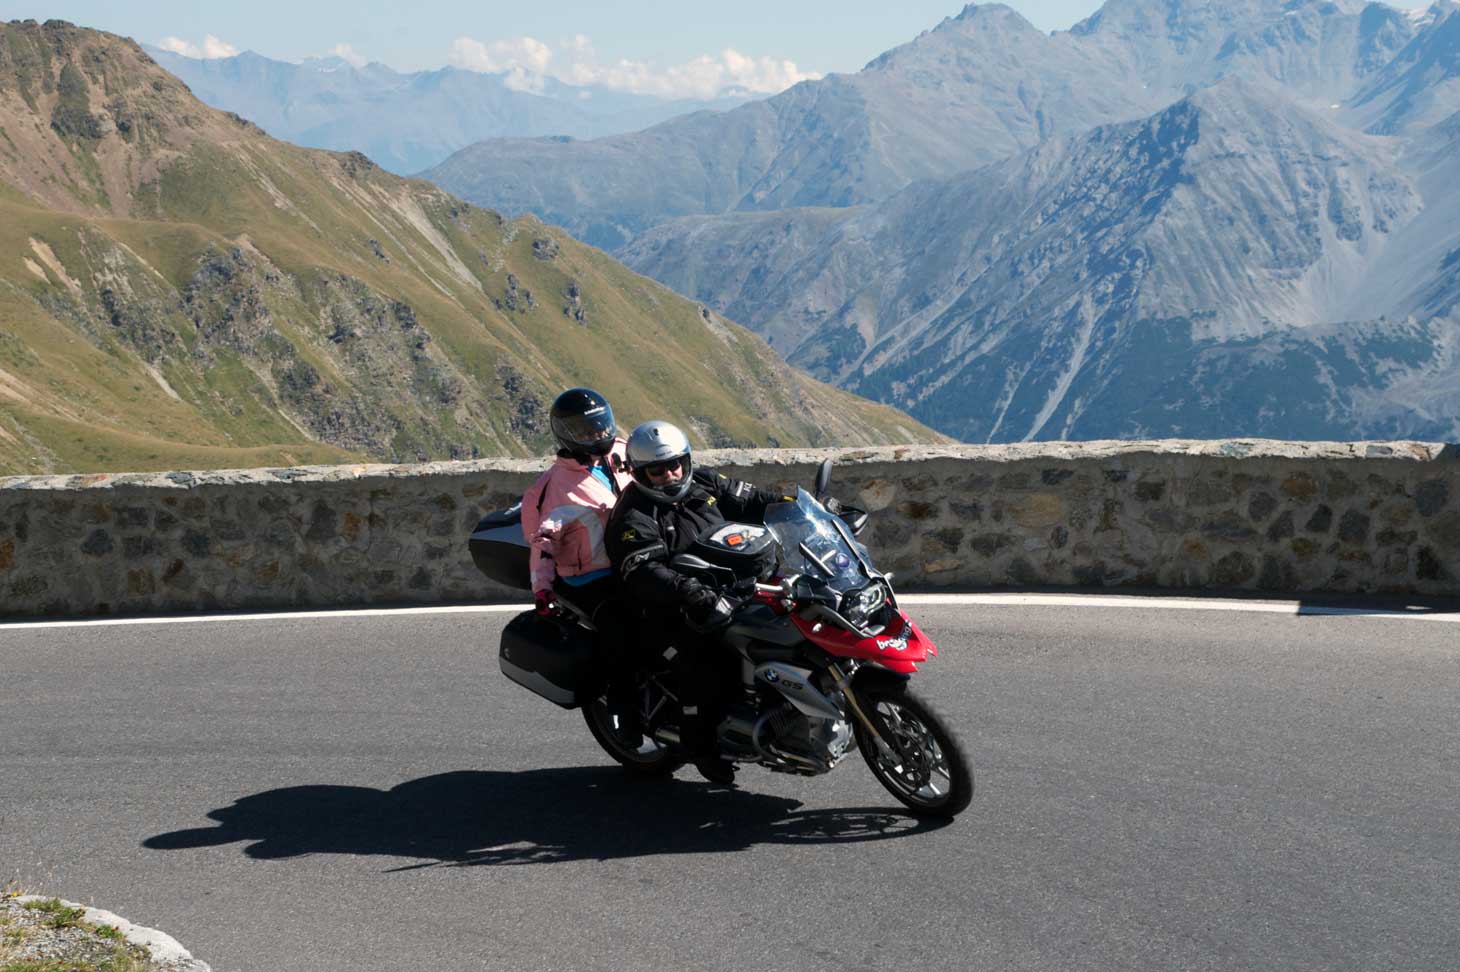 BMW MOA Alps Switchback Challenge 2019 Motorcycle Tour by Ayres Adventures